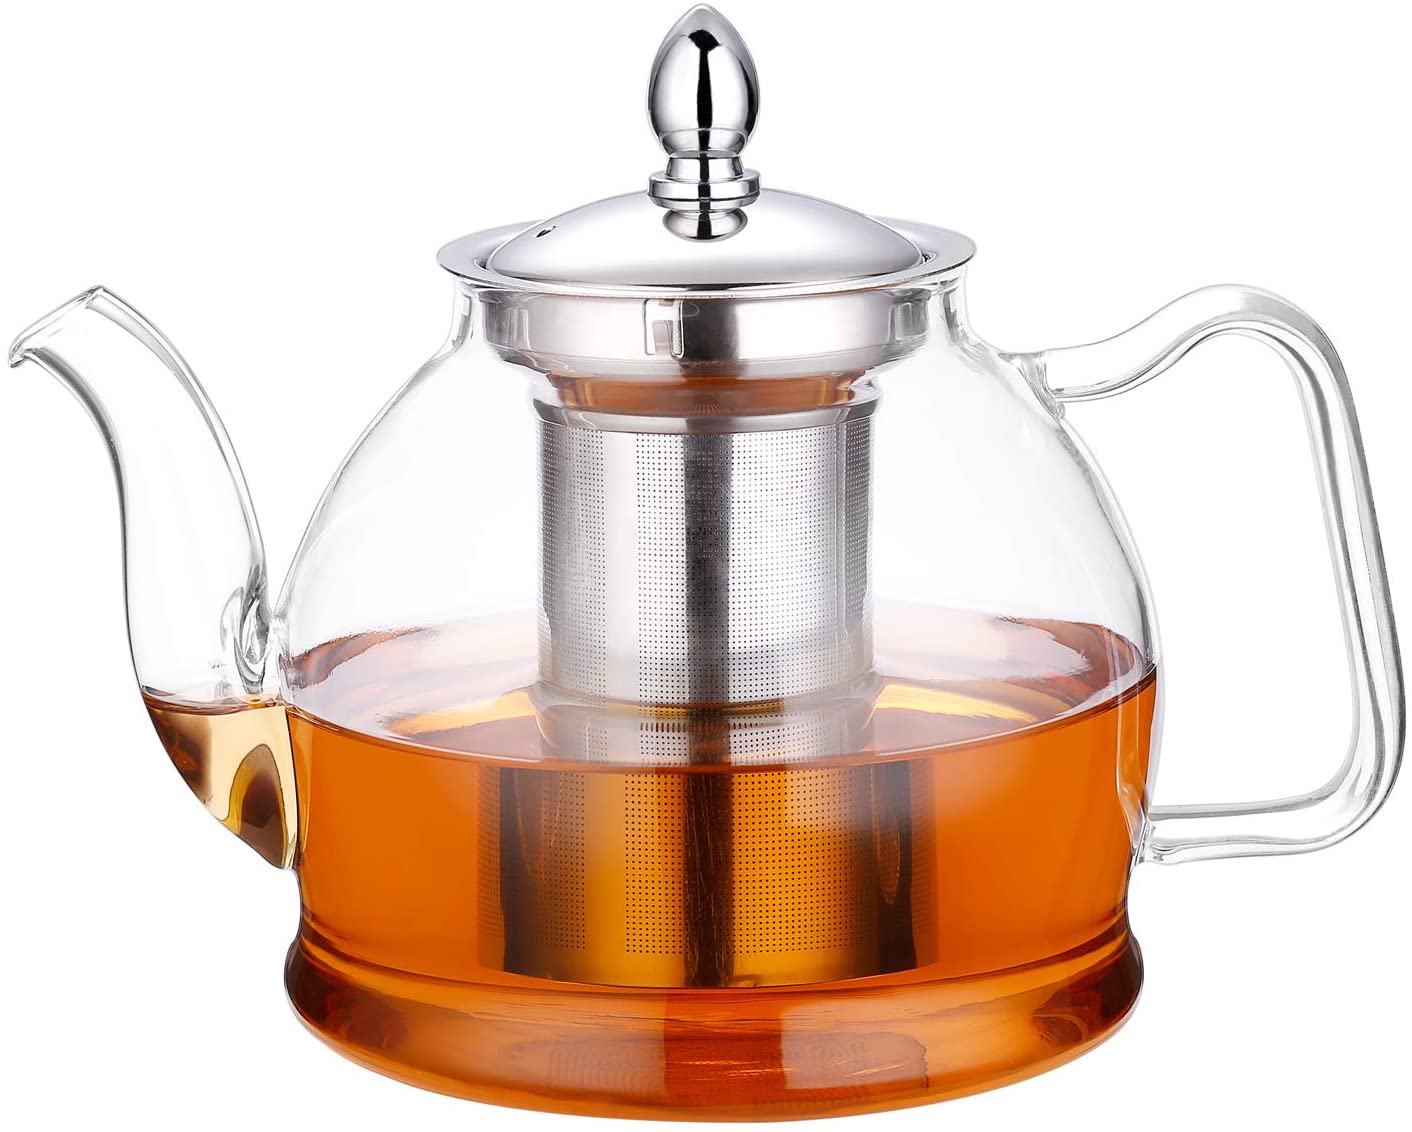 Tea Kettle Whistling Teapot Stove Top Tea Maker with Infuser Strainer 3 Size